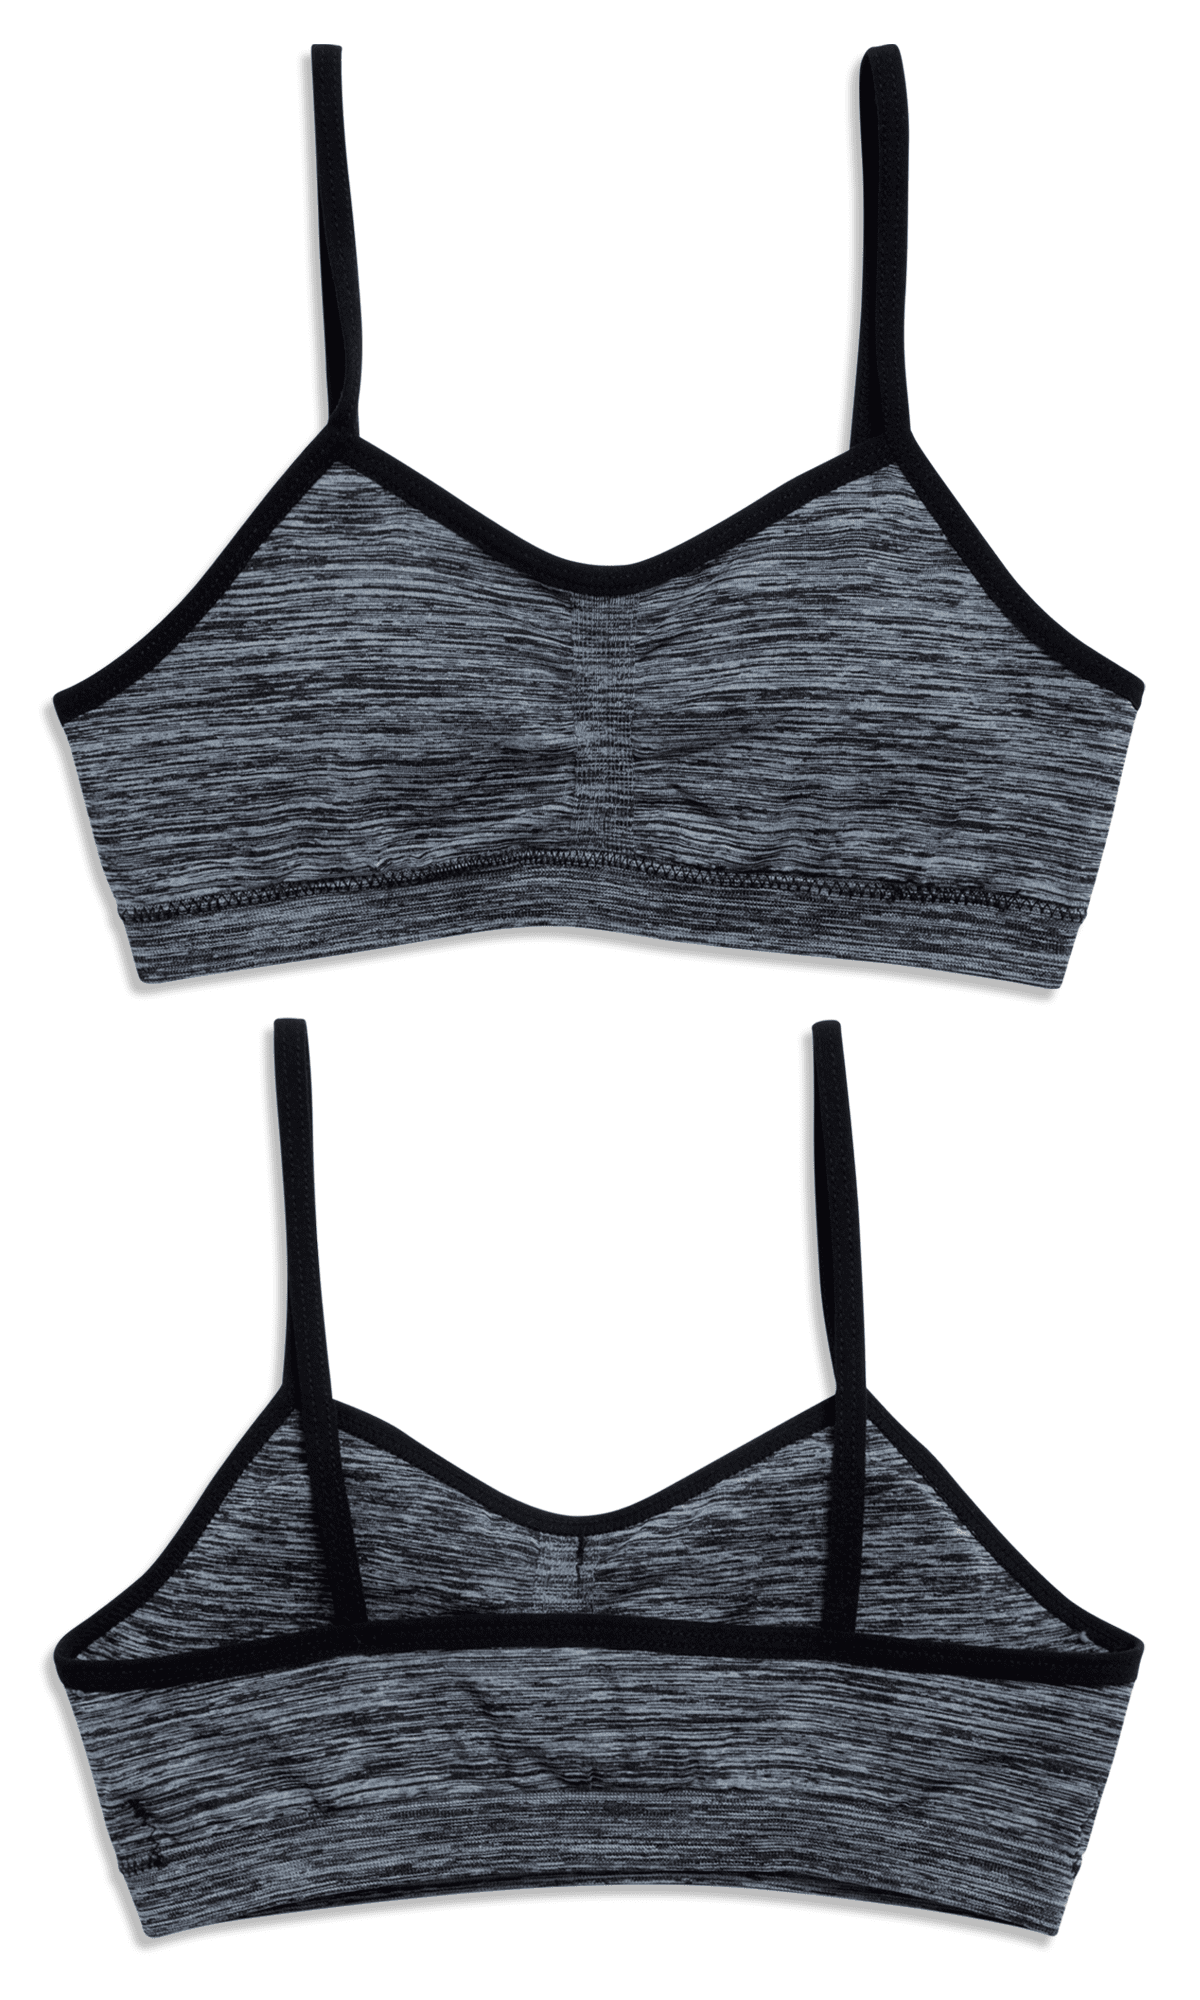 IMSZZ TRADING MODERN DESIGN CAMI SPORTS BRA FOR TEENS AND WOMEN